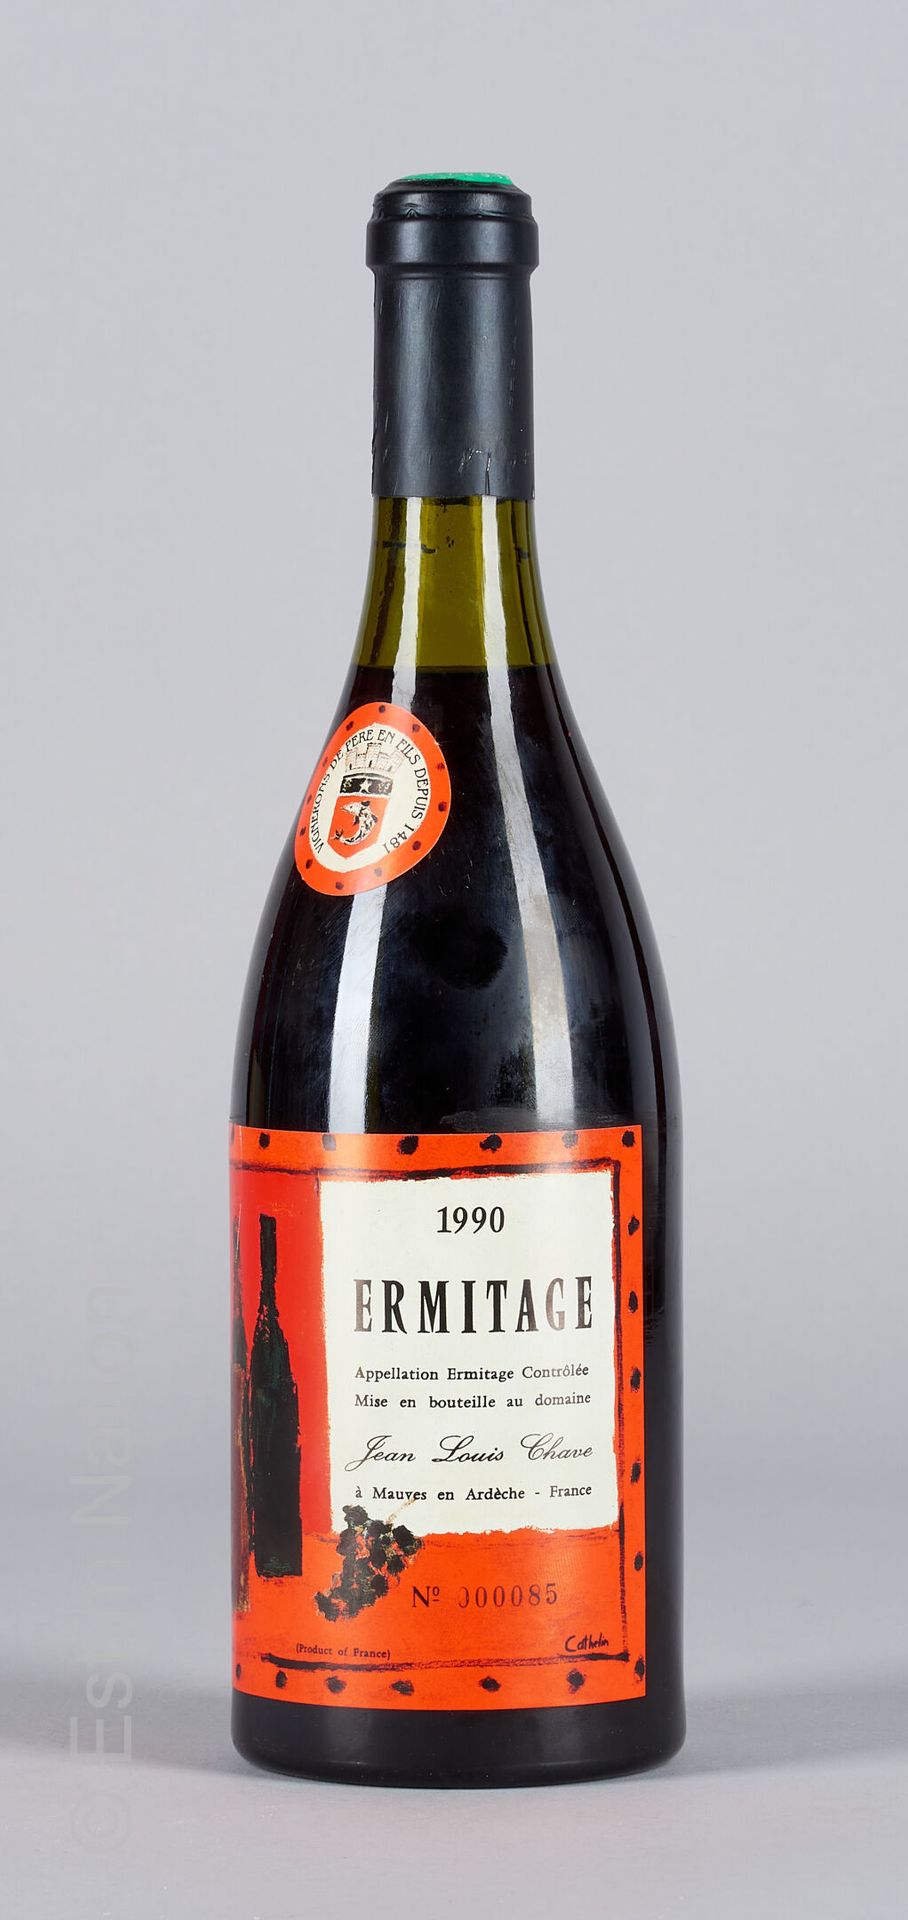 CUVEE CATHELIN 1 bottle ERMITAGE 1990 Cuvée Cathelin Jean-Louis Chave

(N. Betwe&hellip;